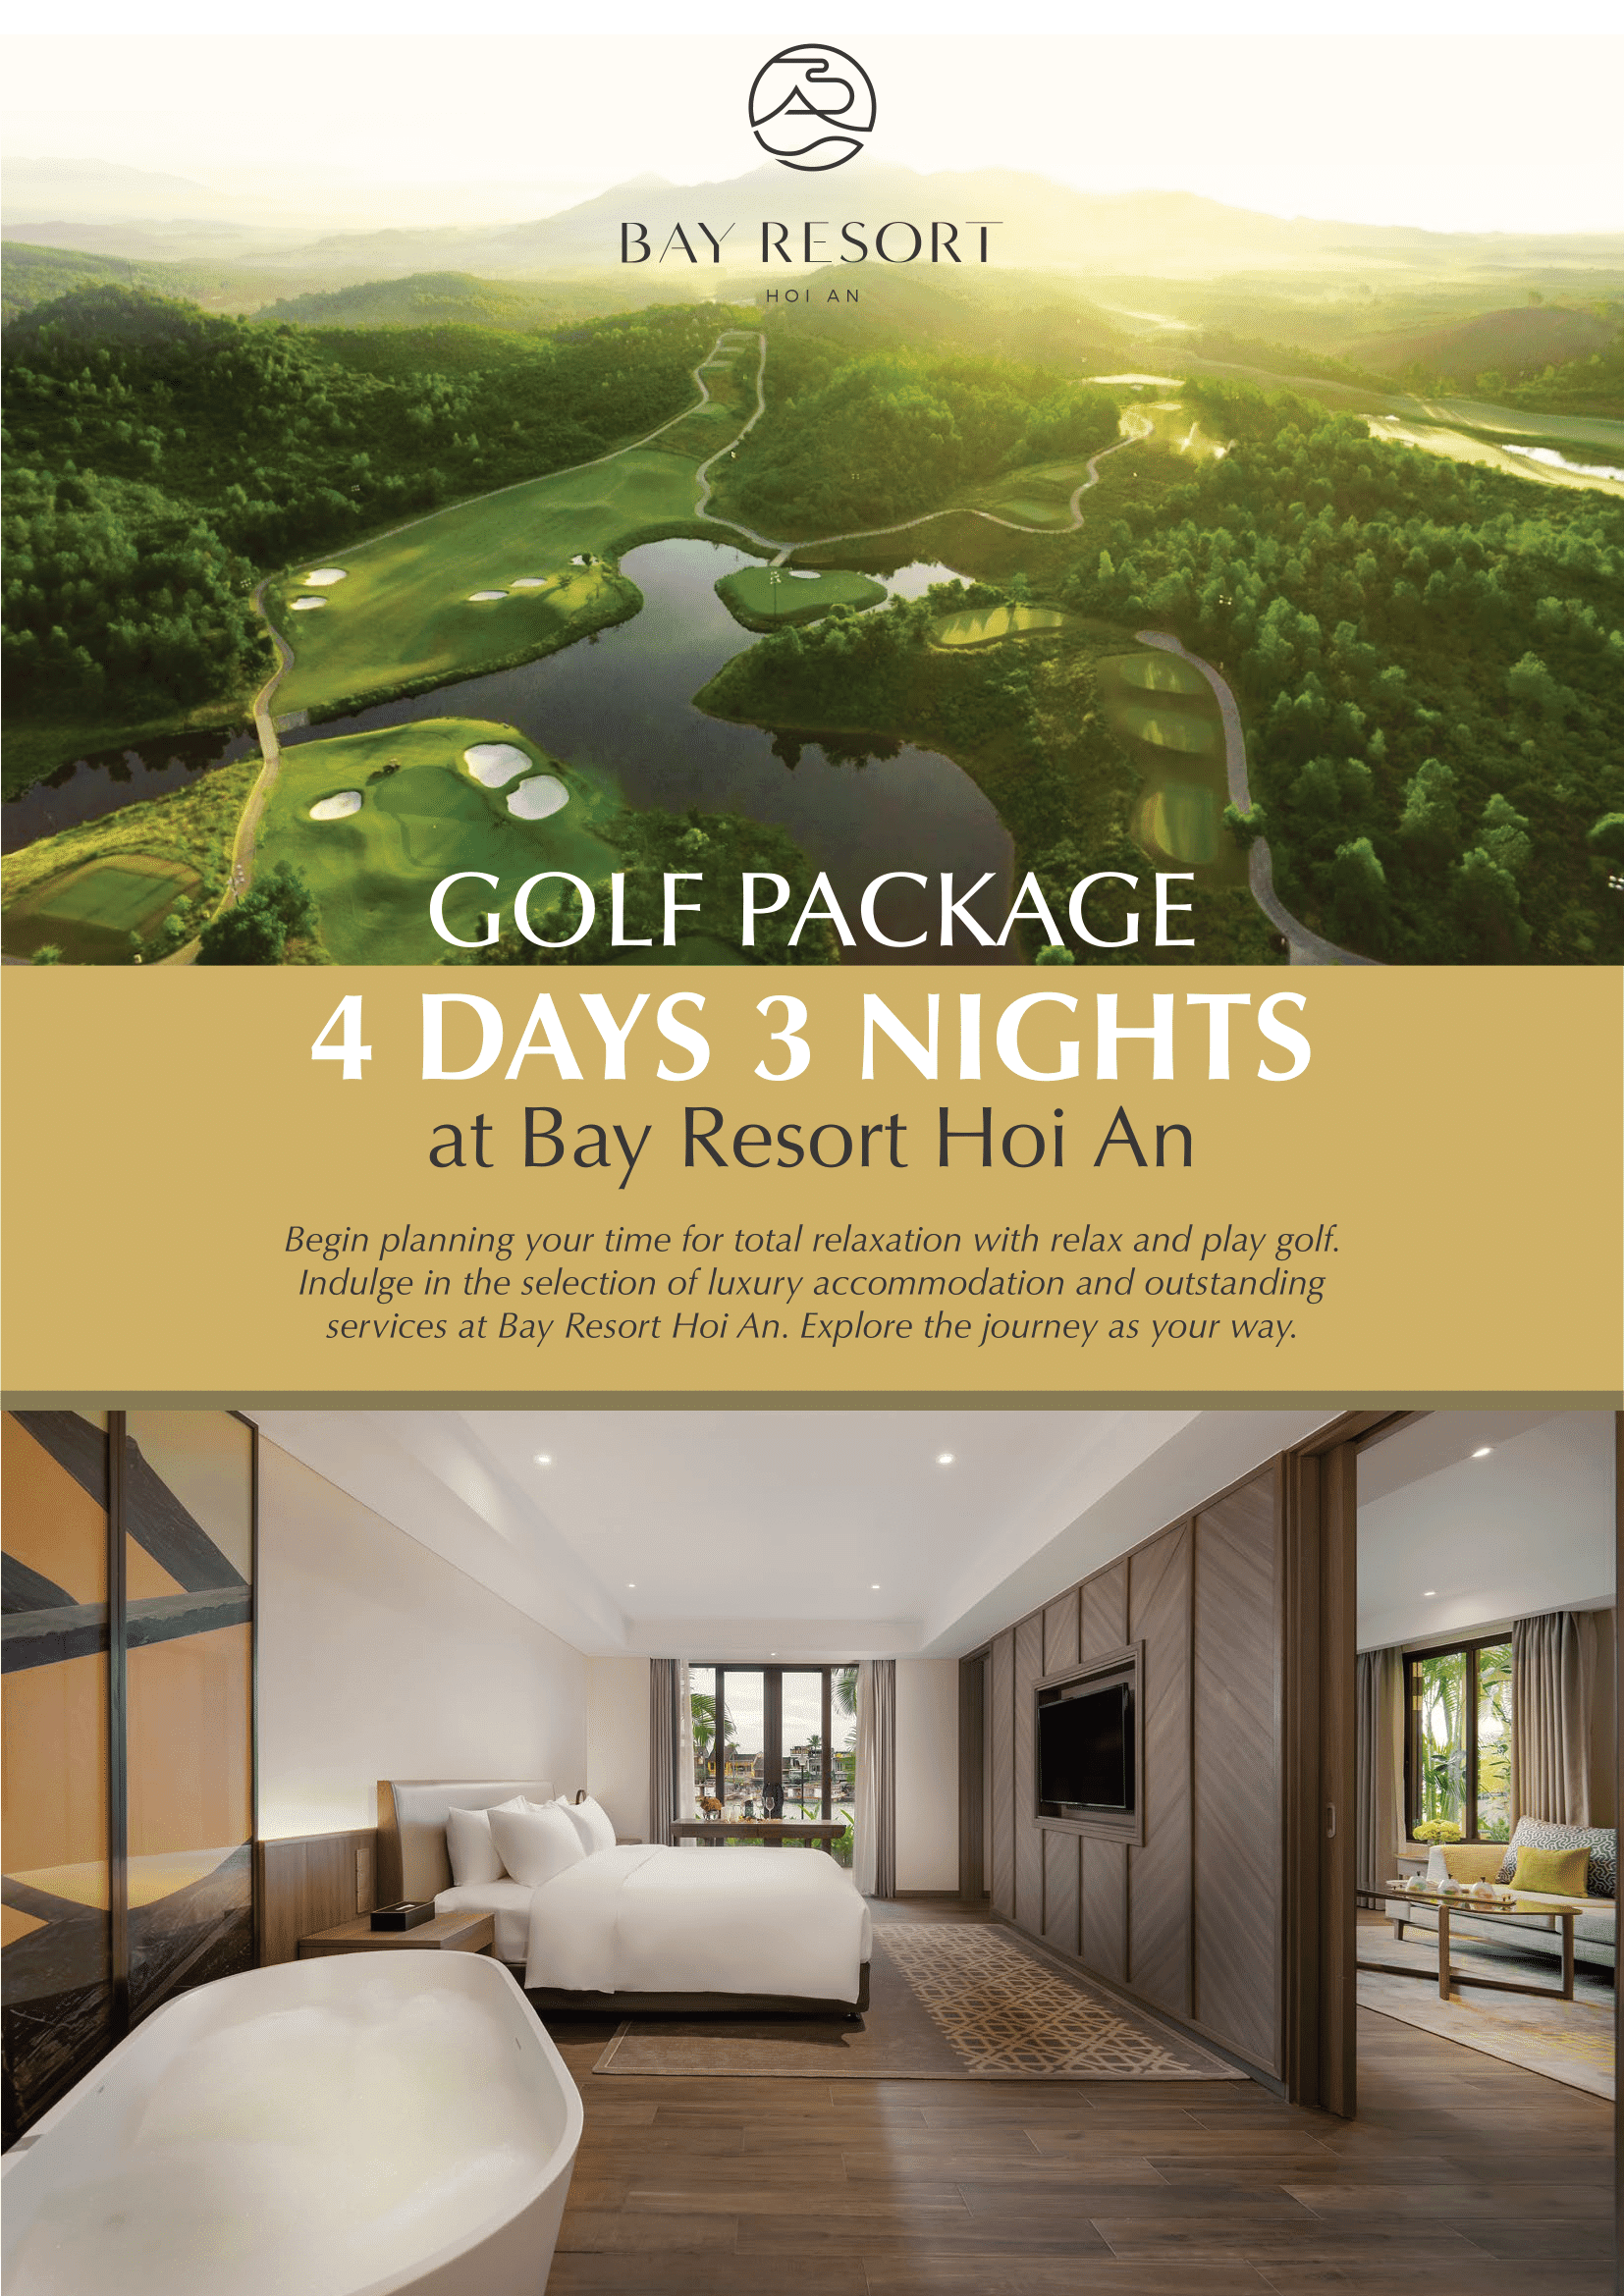 Golf Package 4 Days 3 Nights Promotion | Bay Resort Hoi An